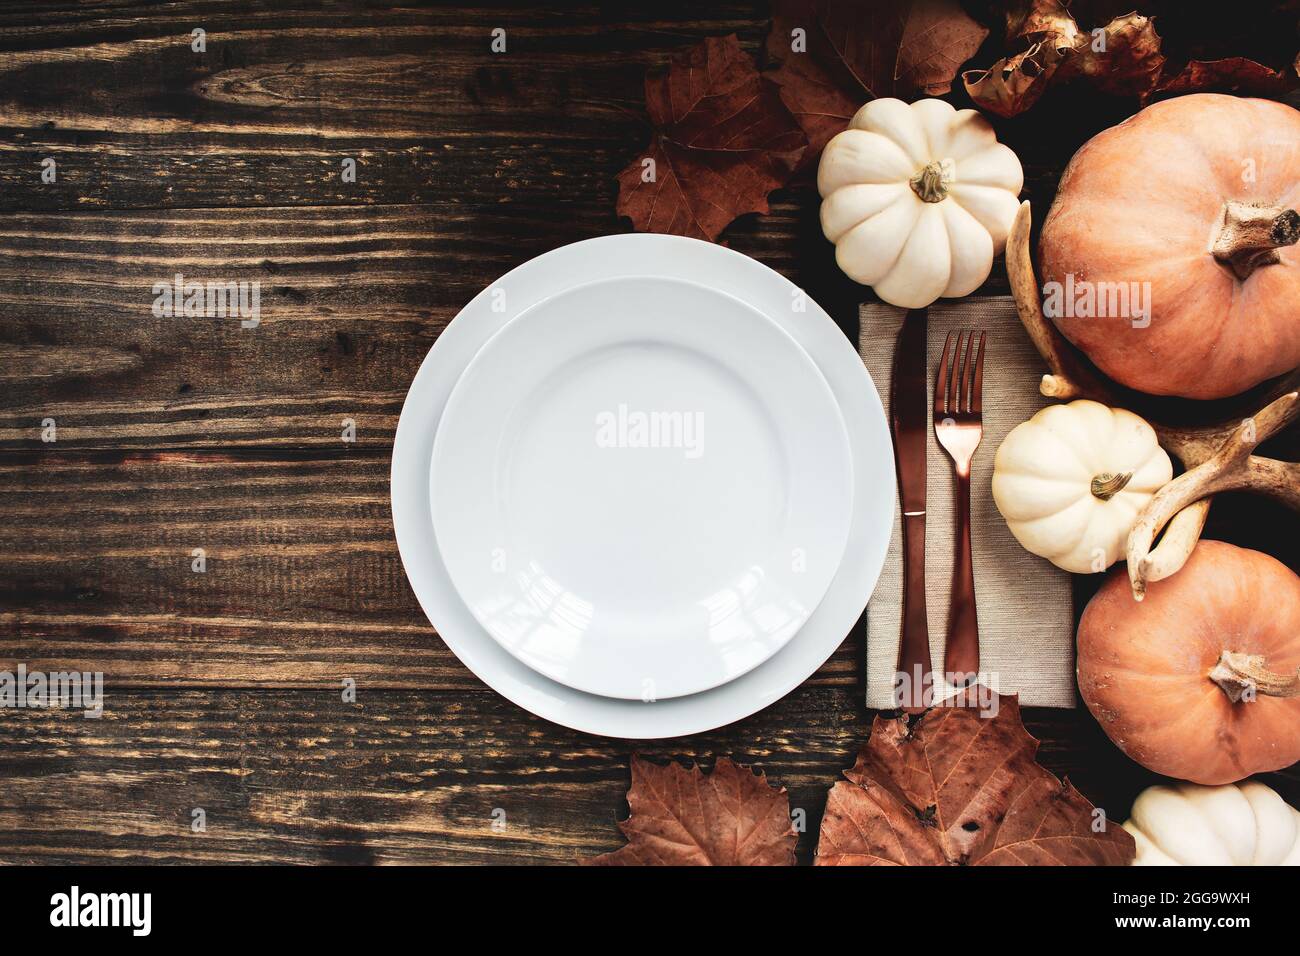 Holiday place setting with plate, napkin, and silverware on a Thanksgiving Day decorated table shot from flat lay or top view position. Stock Photo